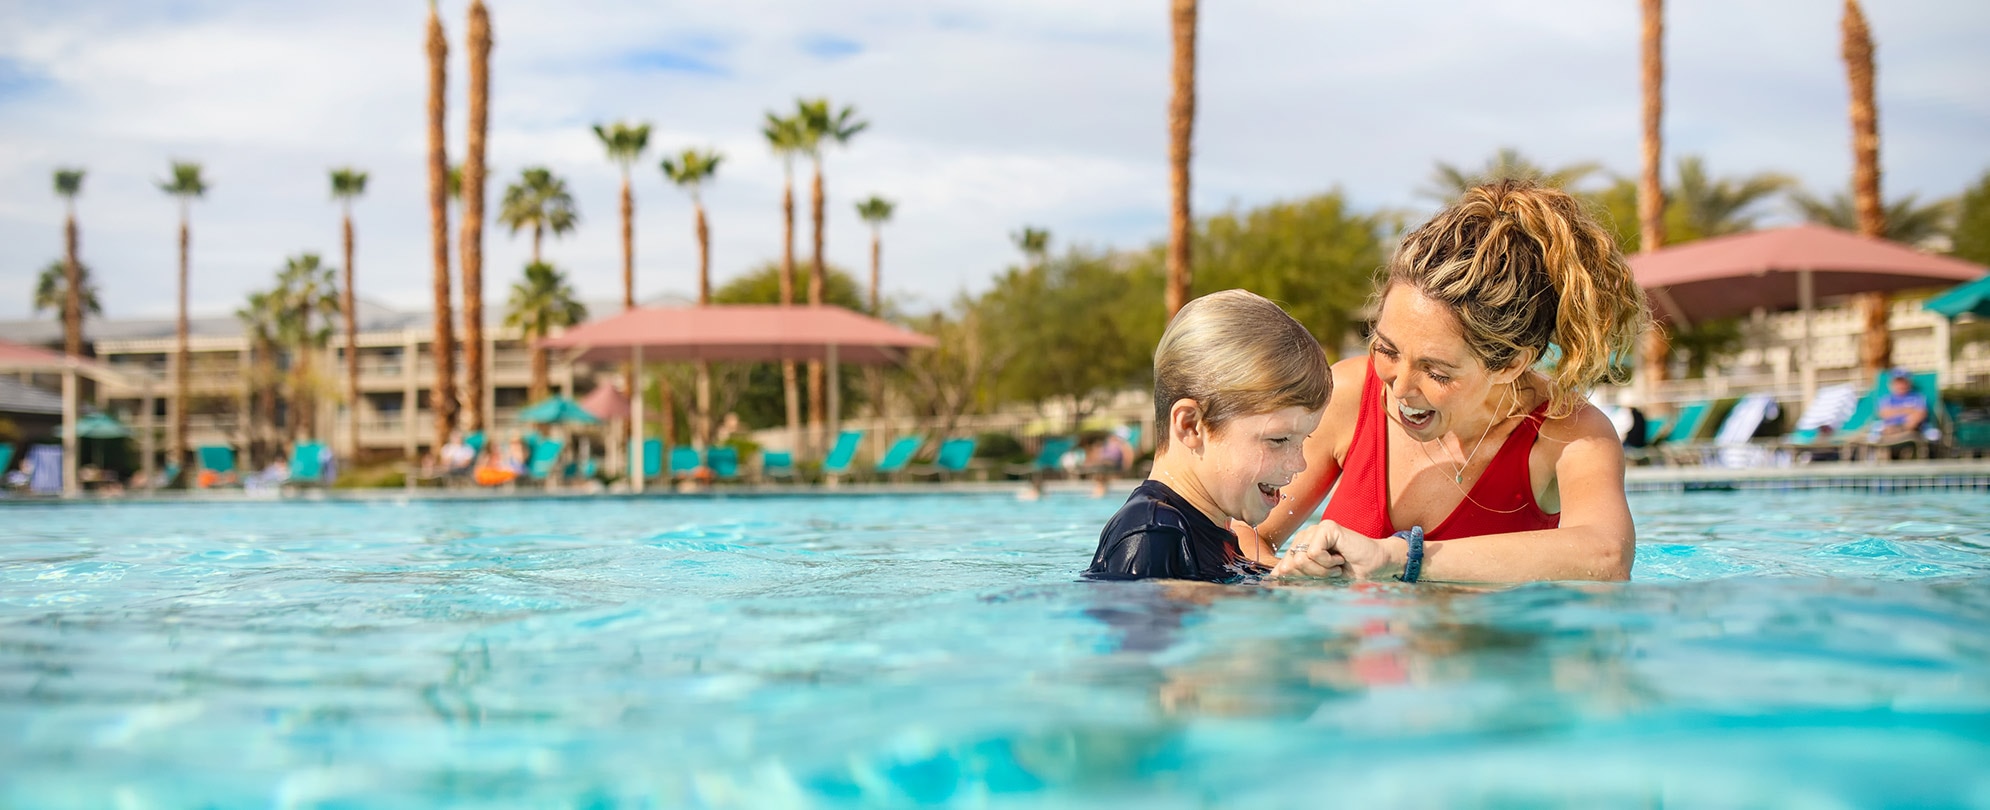 Mom in a red swimsuit and her son smile and splash in a pool on their WorldMark by Wyndham timeshare vacation.